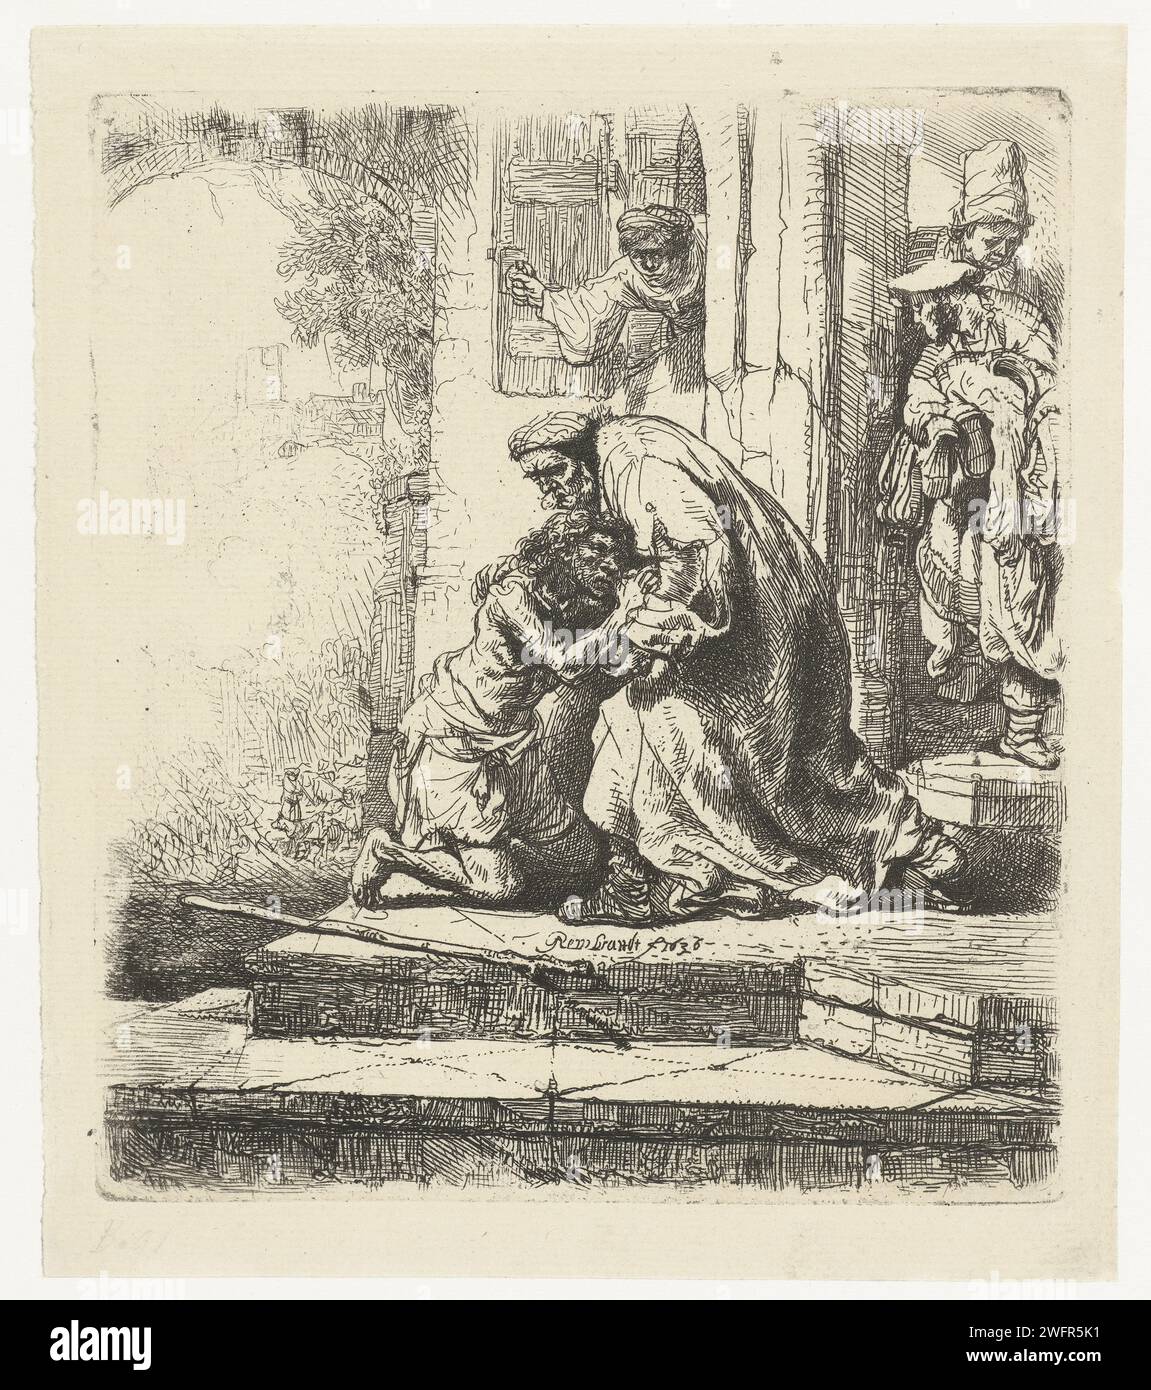 The Return of the Prodigal Son, Rembrandt van Rijn, 1850 - 1906 print   paper etching the parable of the prodigal son (Luke 15:11-32) Stock Photo